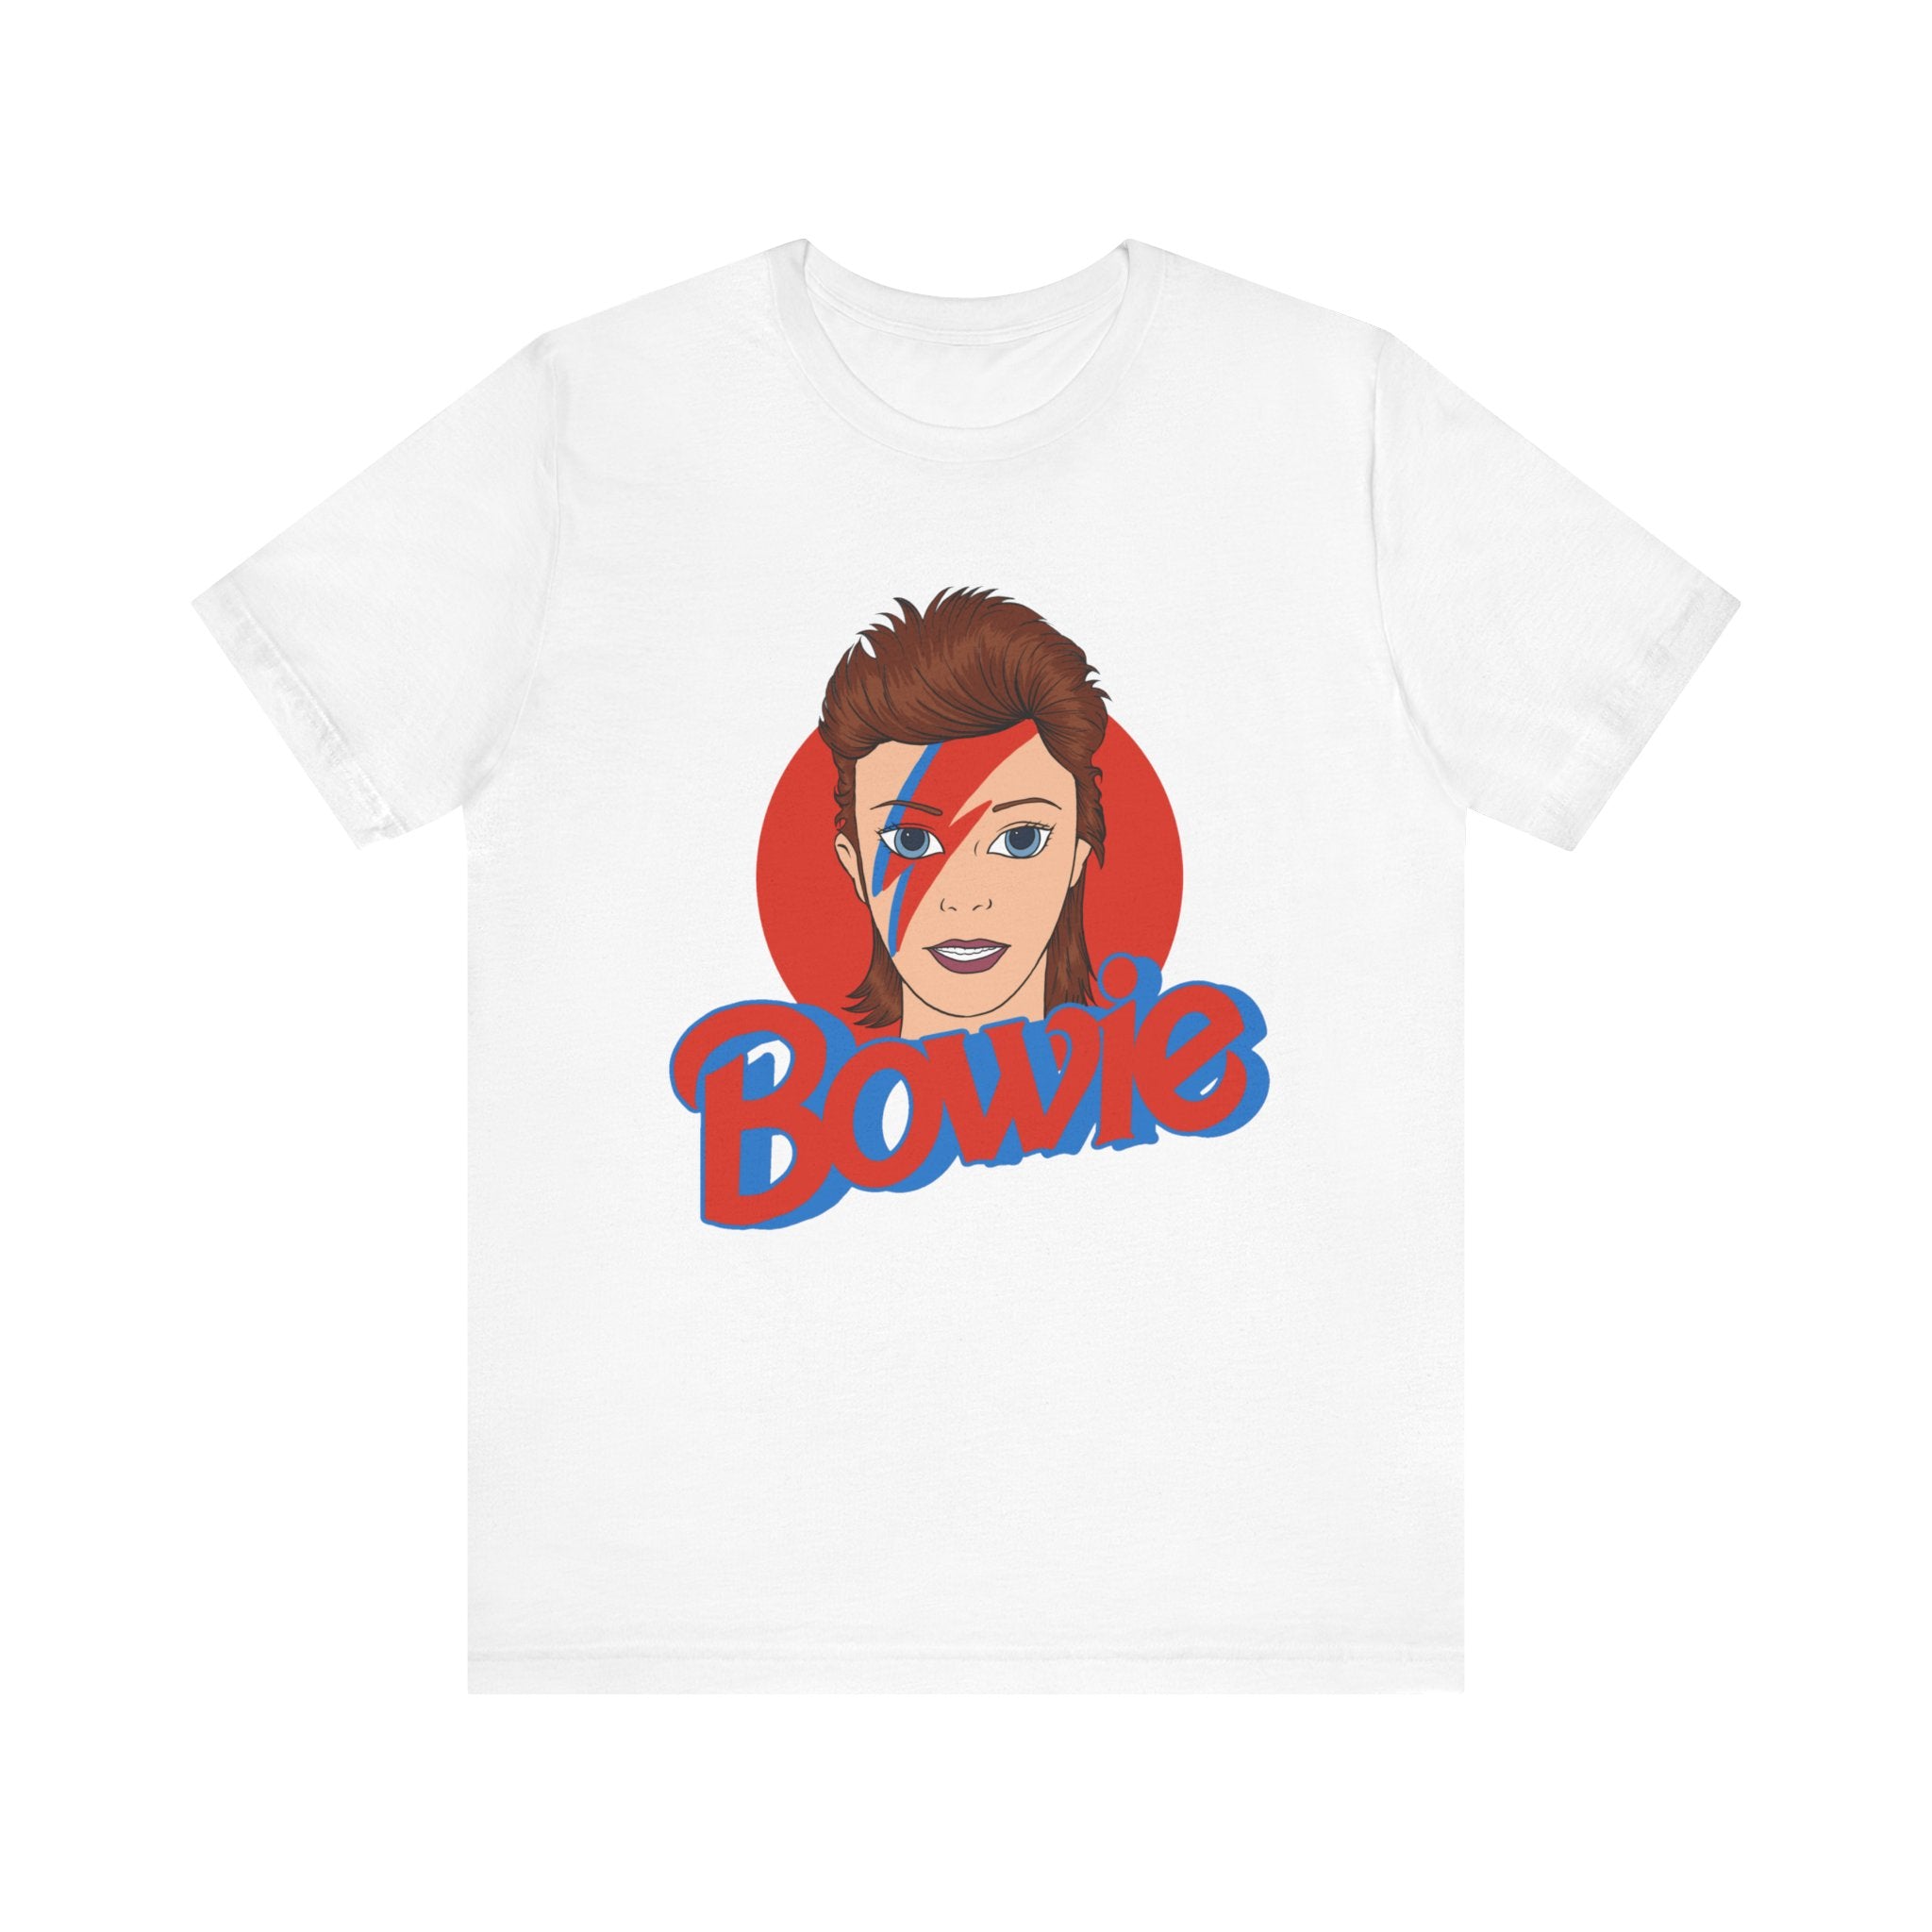 Unisex Bowie T-shirt featuring a graphic of David Bowie's face with red hair and the word "Bowie" in blue below.